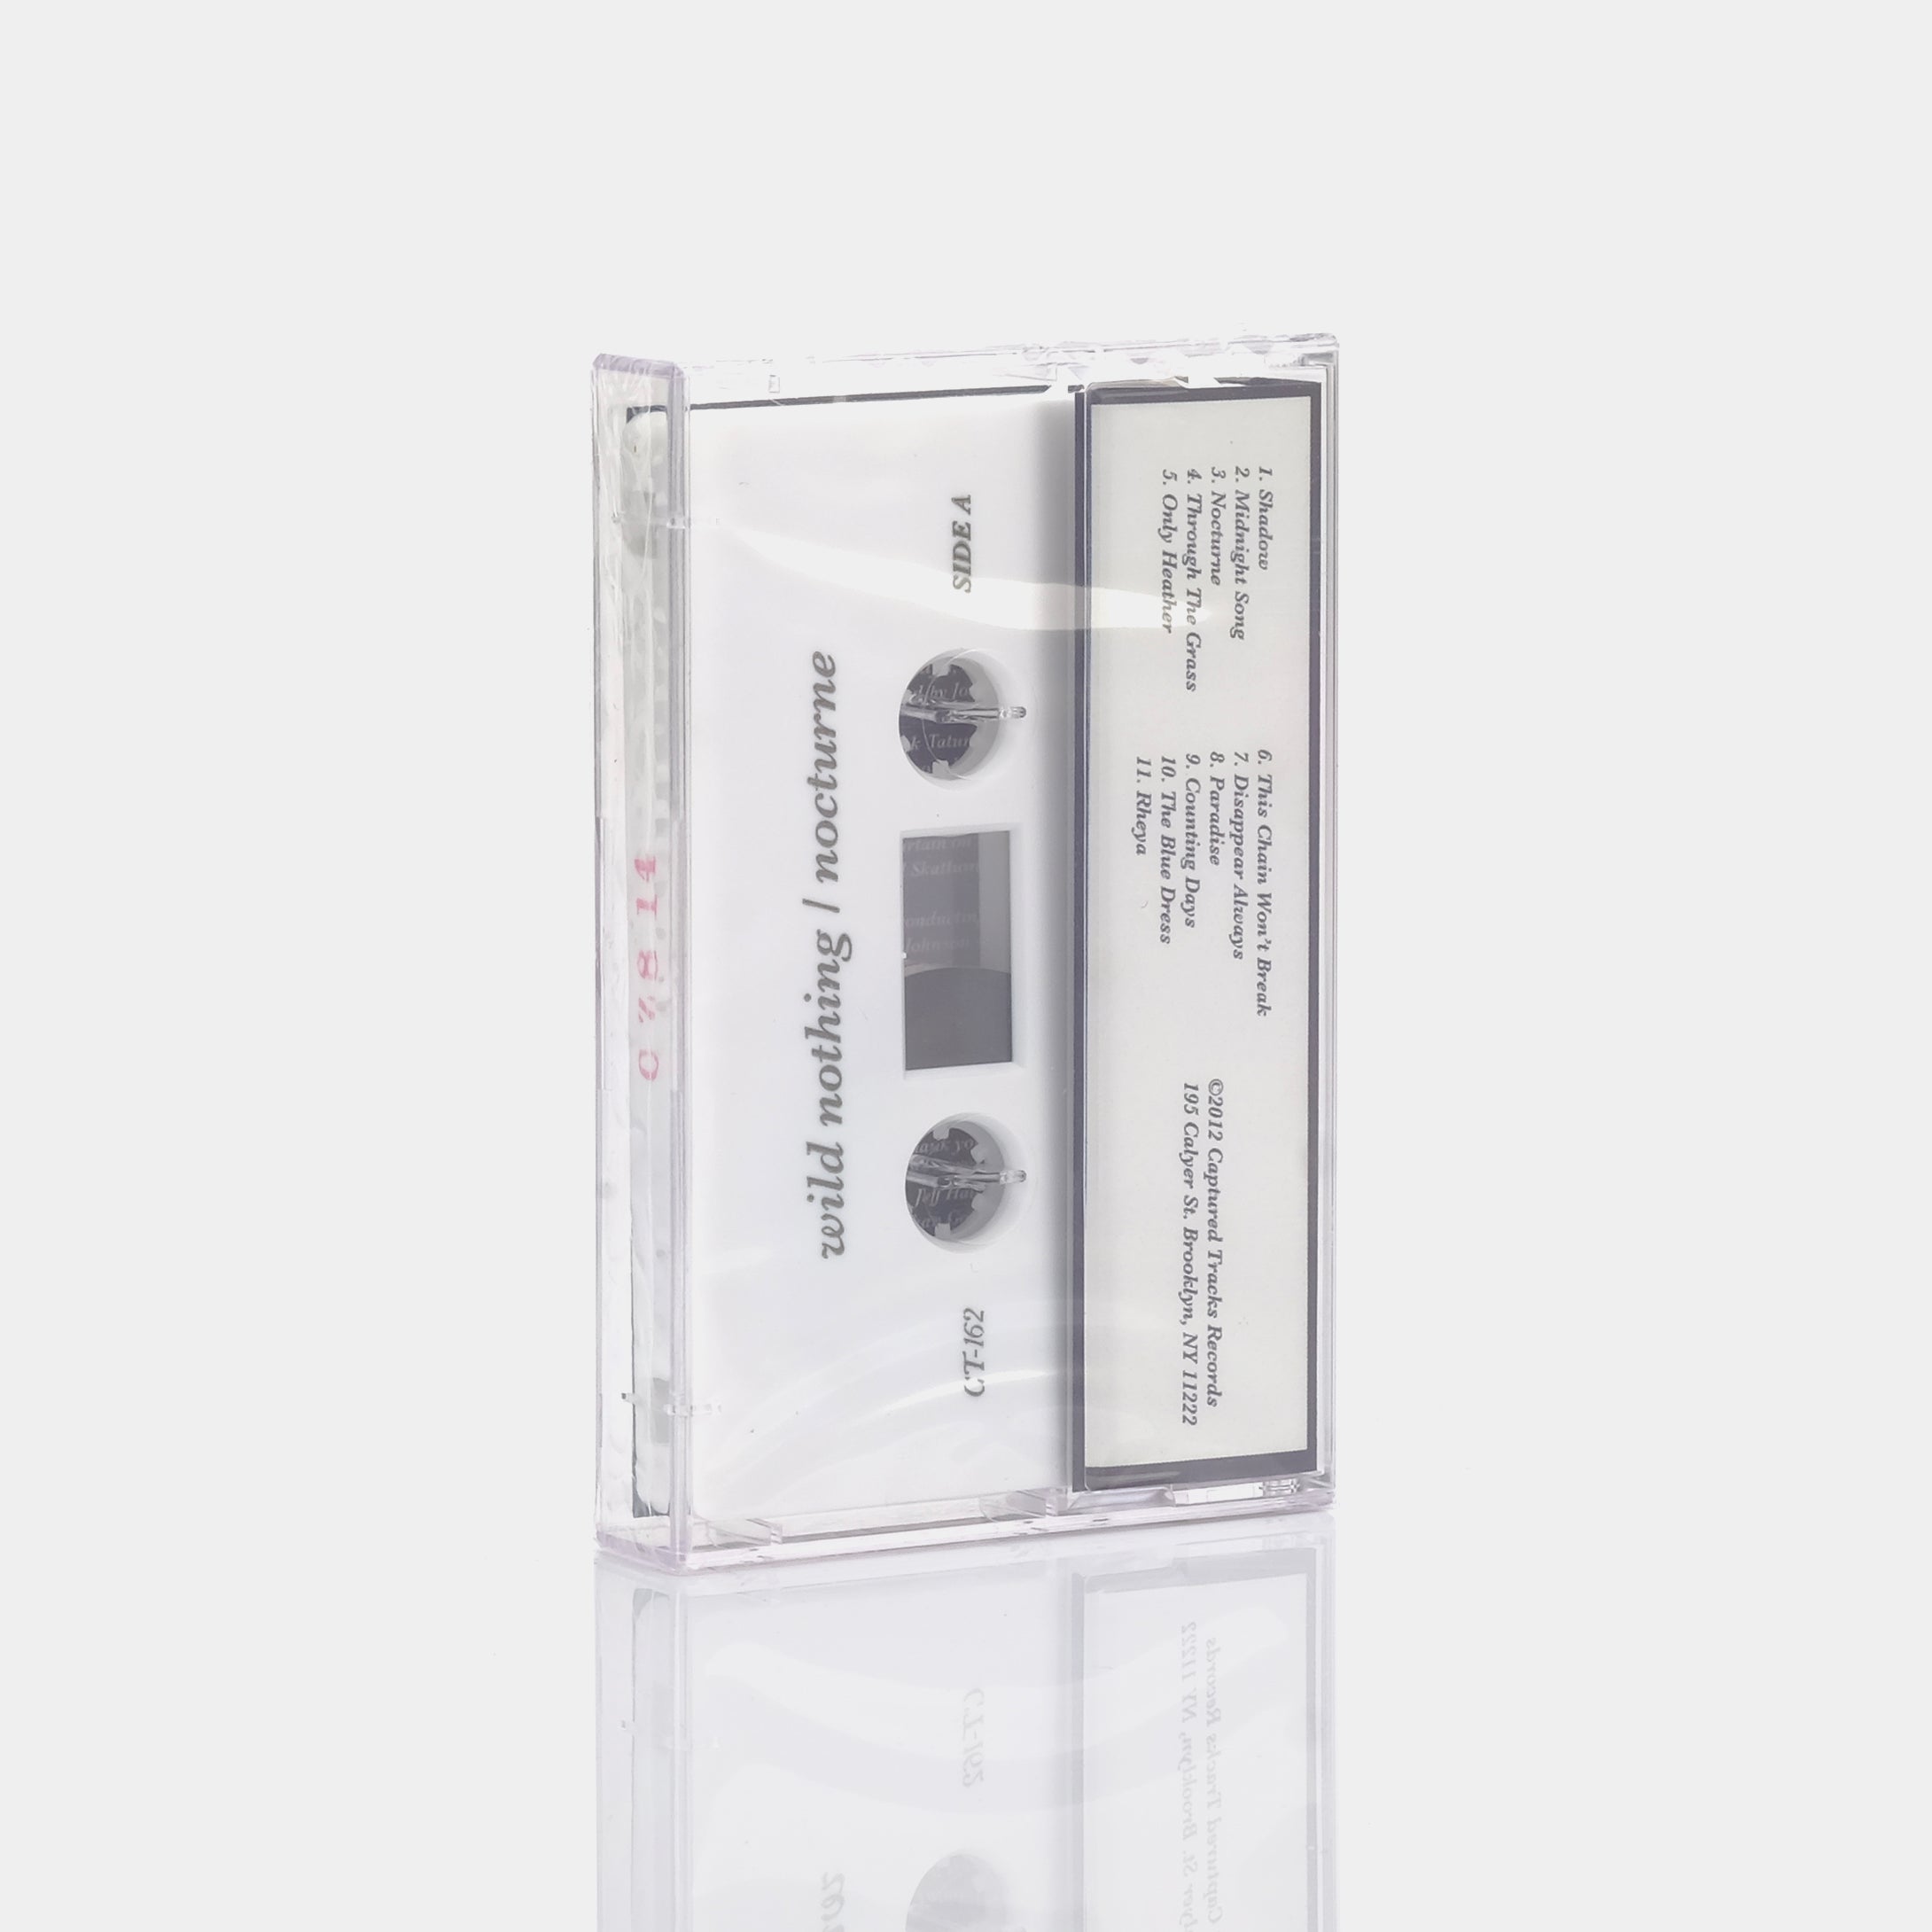 Wild Nothing - Nocturne Cassette Tape